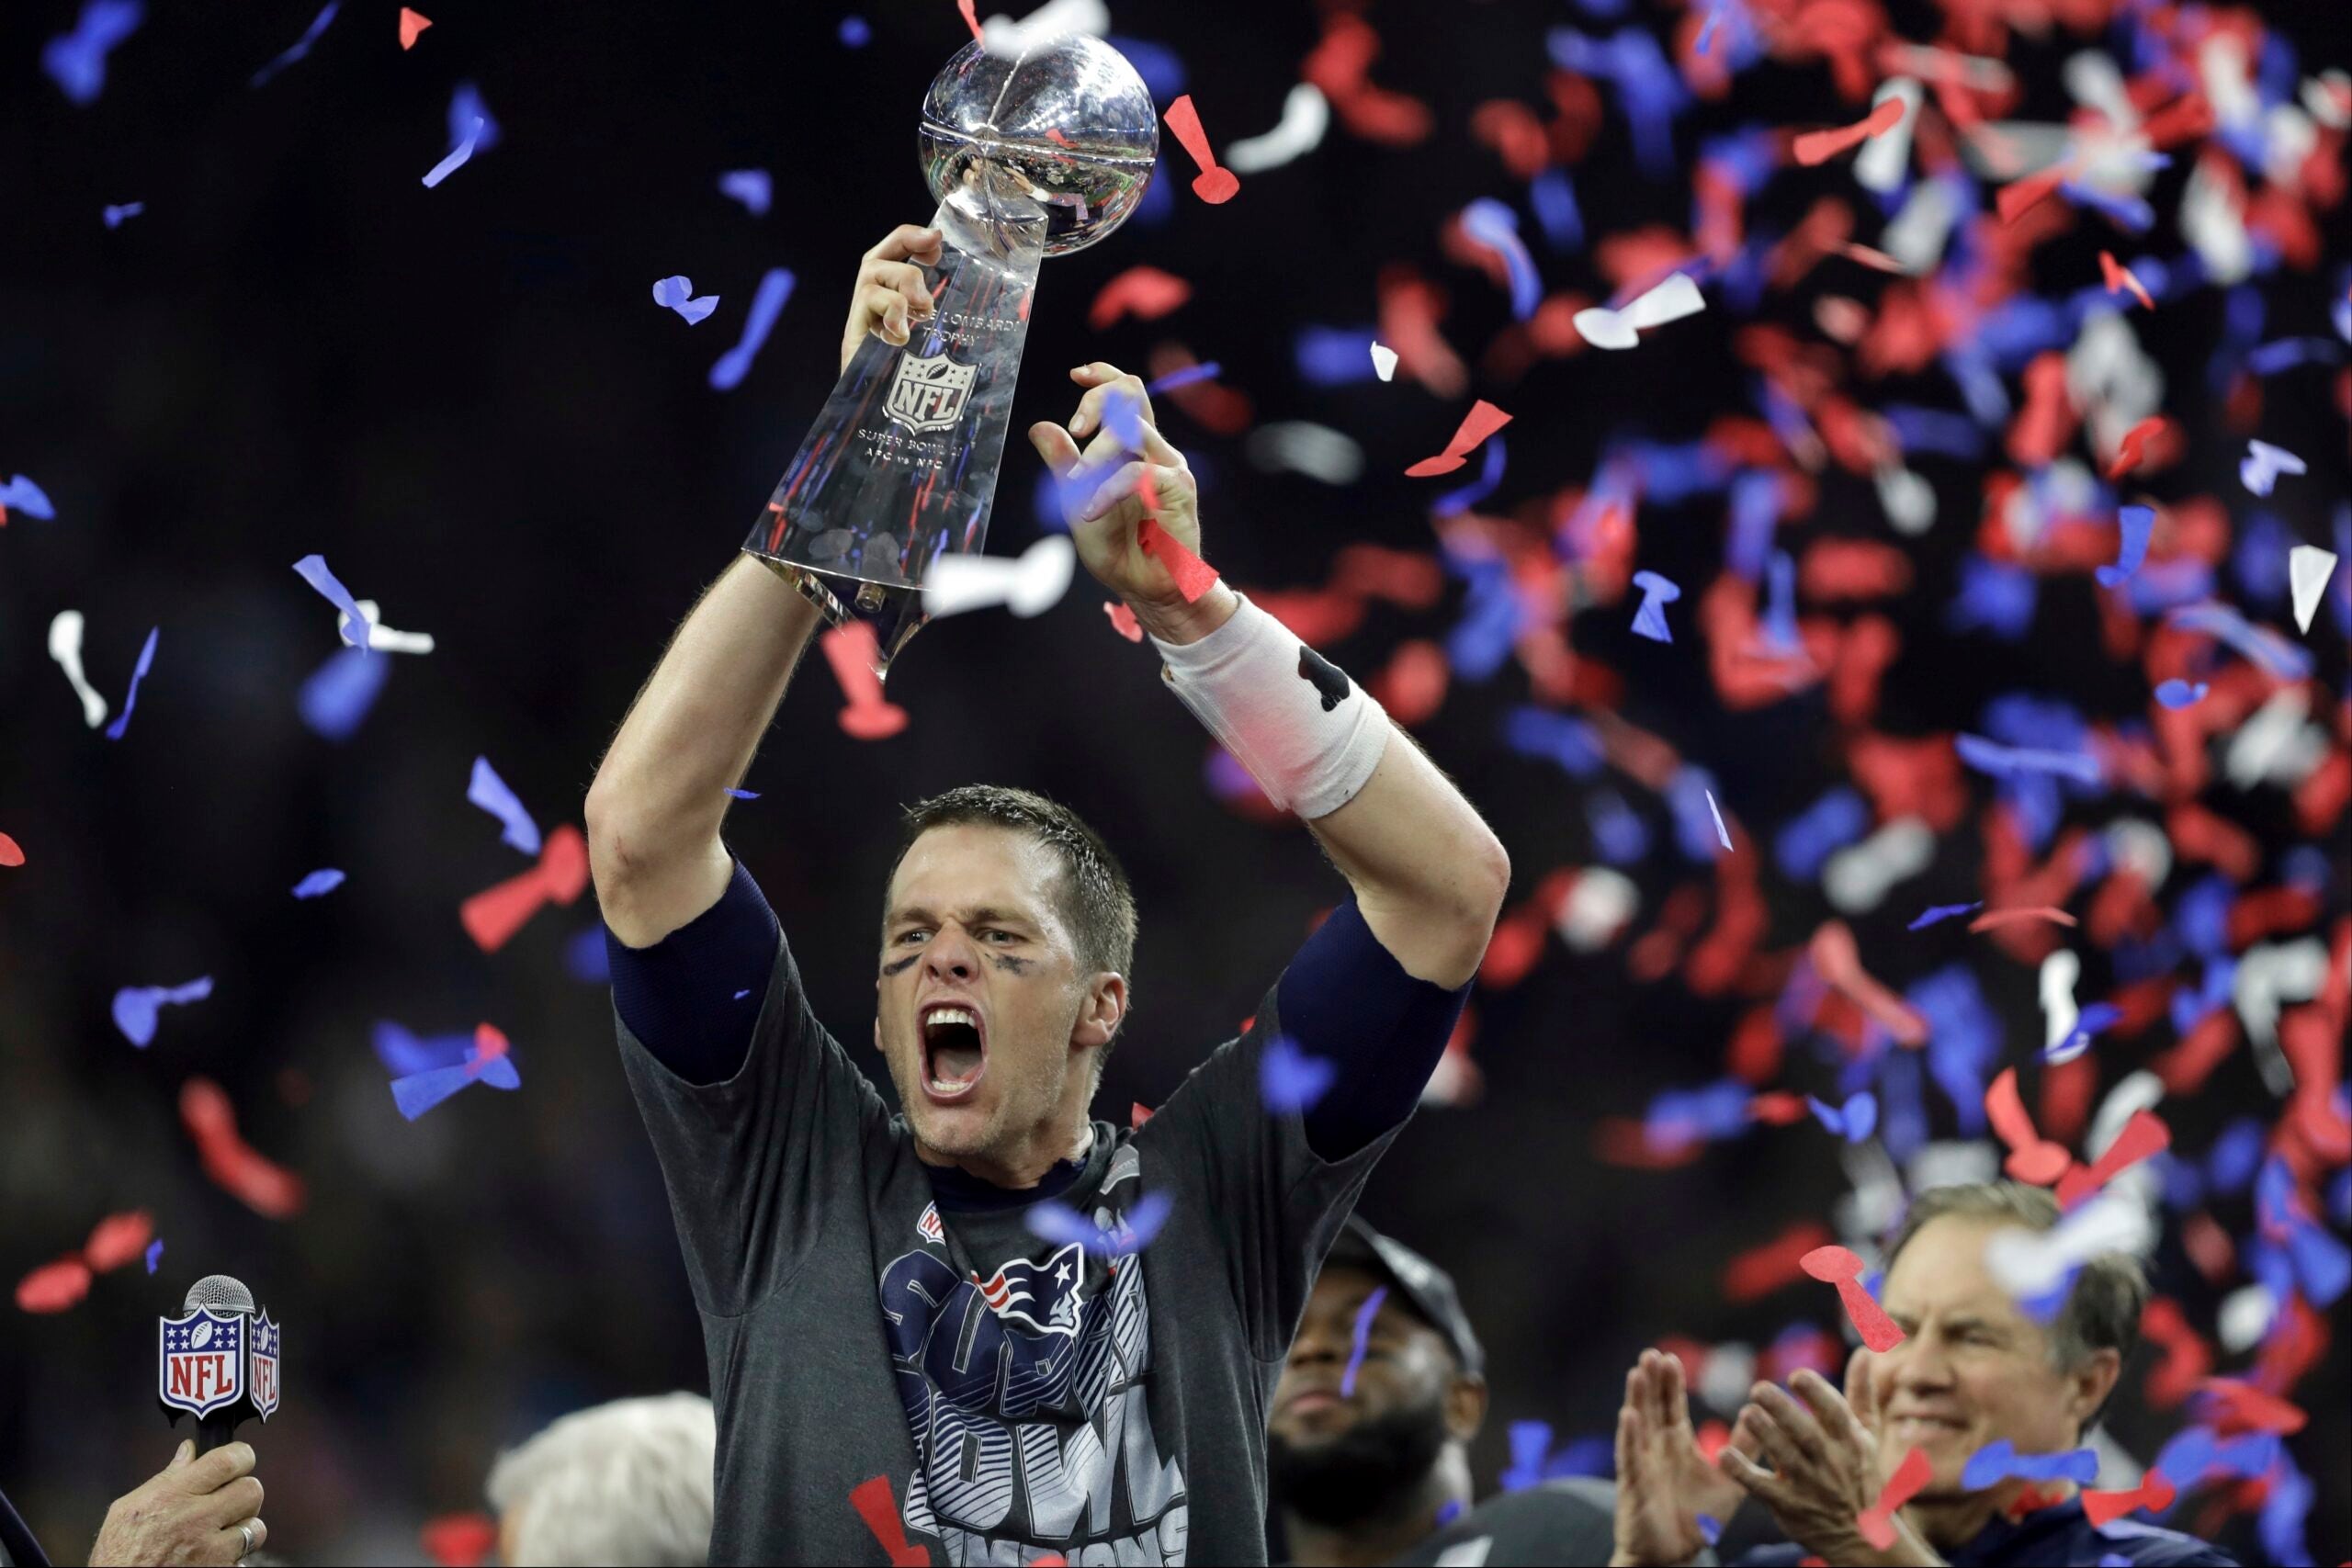 New England Patriots' Tom Brady raises the Vince Lombardi Trophy after defeating the Atlanta Falcons in overtime at the NFL Super Bowl 51 football game Sunday, Feb. 5, 2017, in Houston.